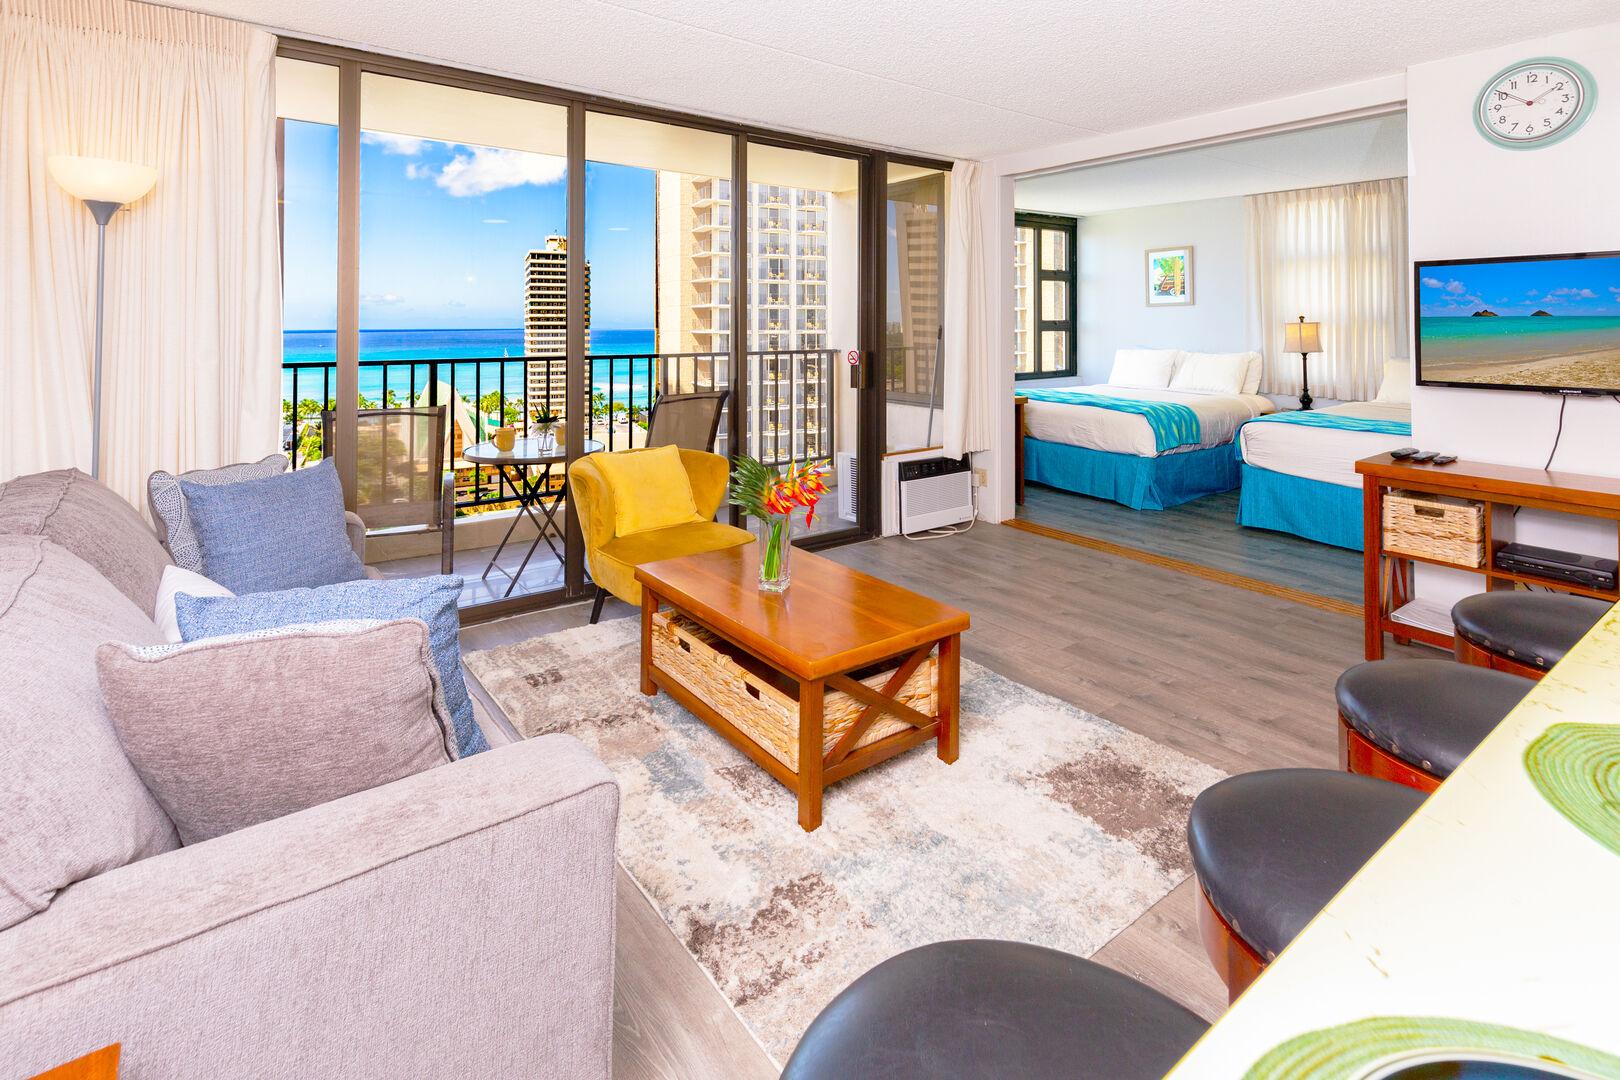 Stunning ocean view from the comfort of your own balcony and living room with a comfortable sofa bed, and coffee table.